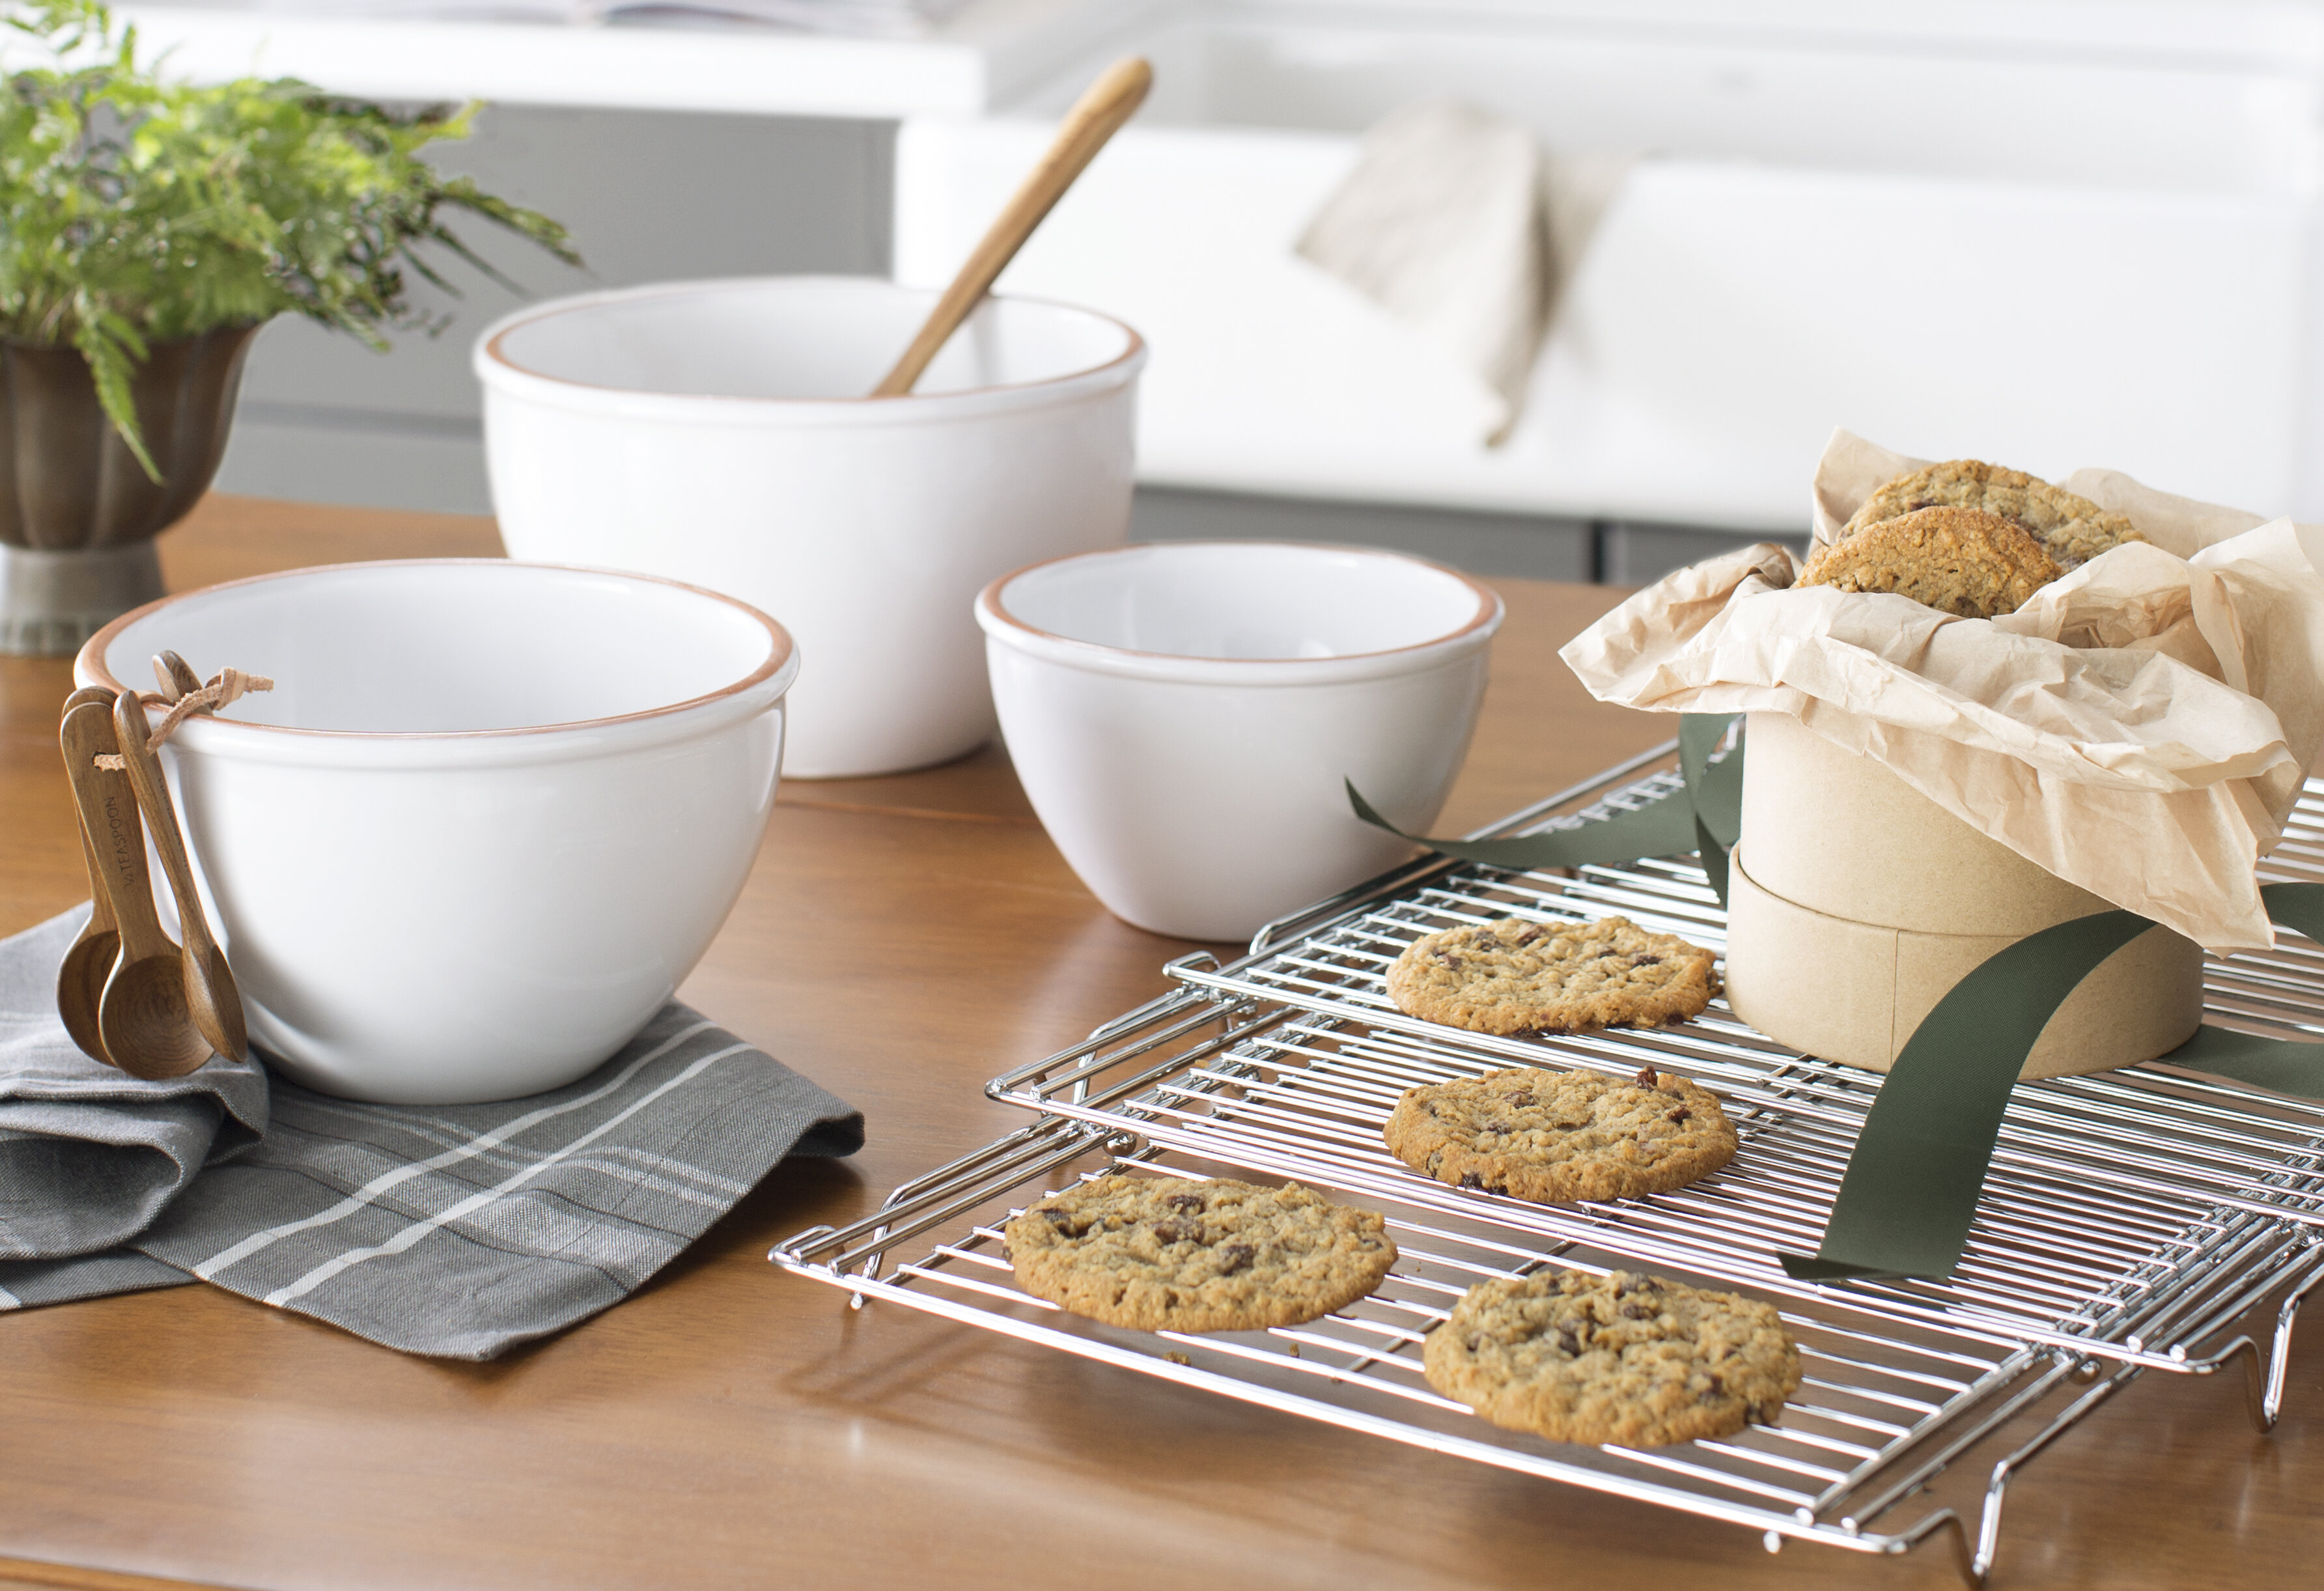 Last Confection Stainless Steel Baking & Cooling Rack - Cookie